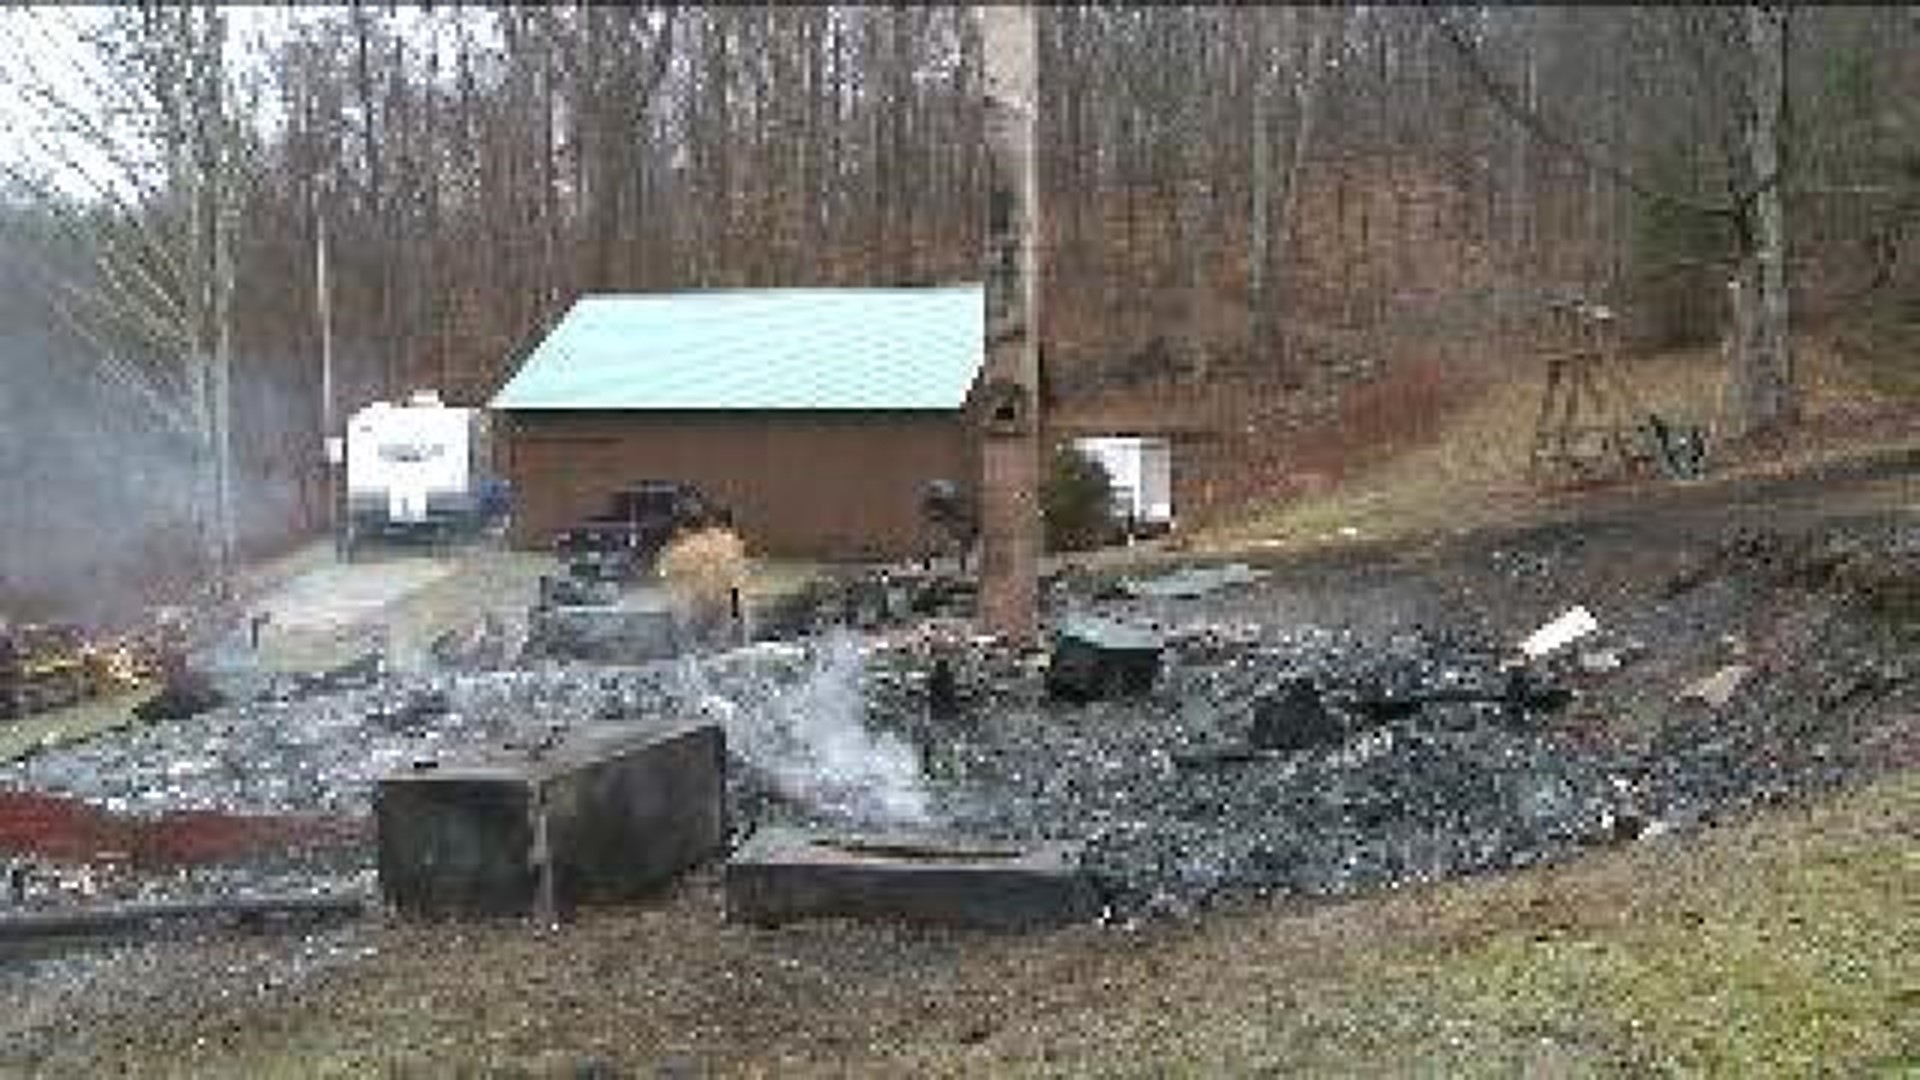 Only a Chimney Standing After Susquehanna County Fire